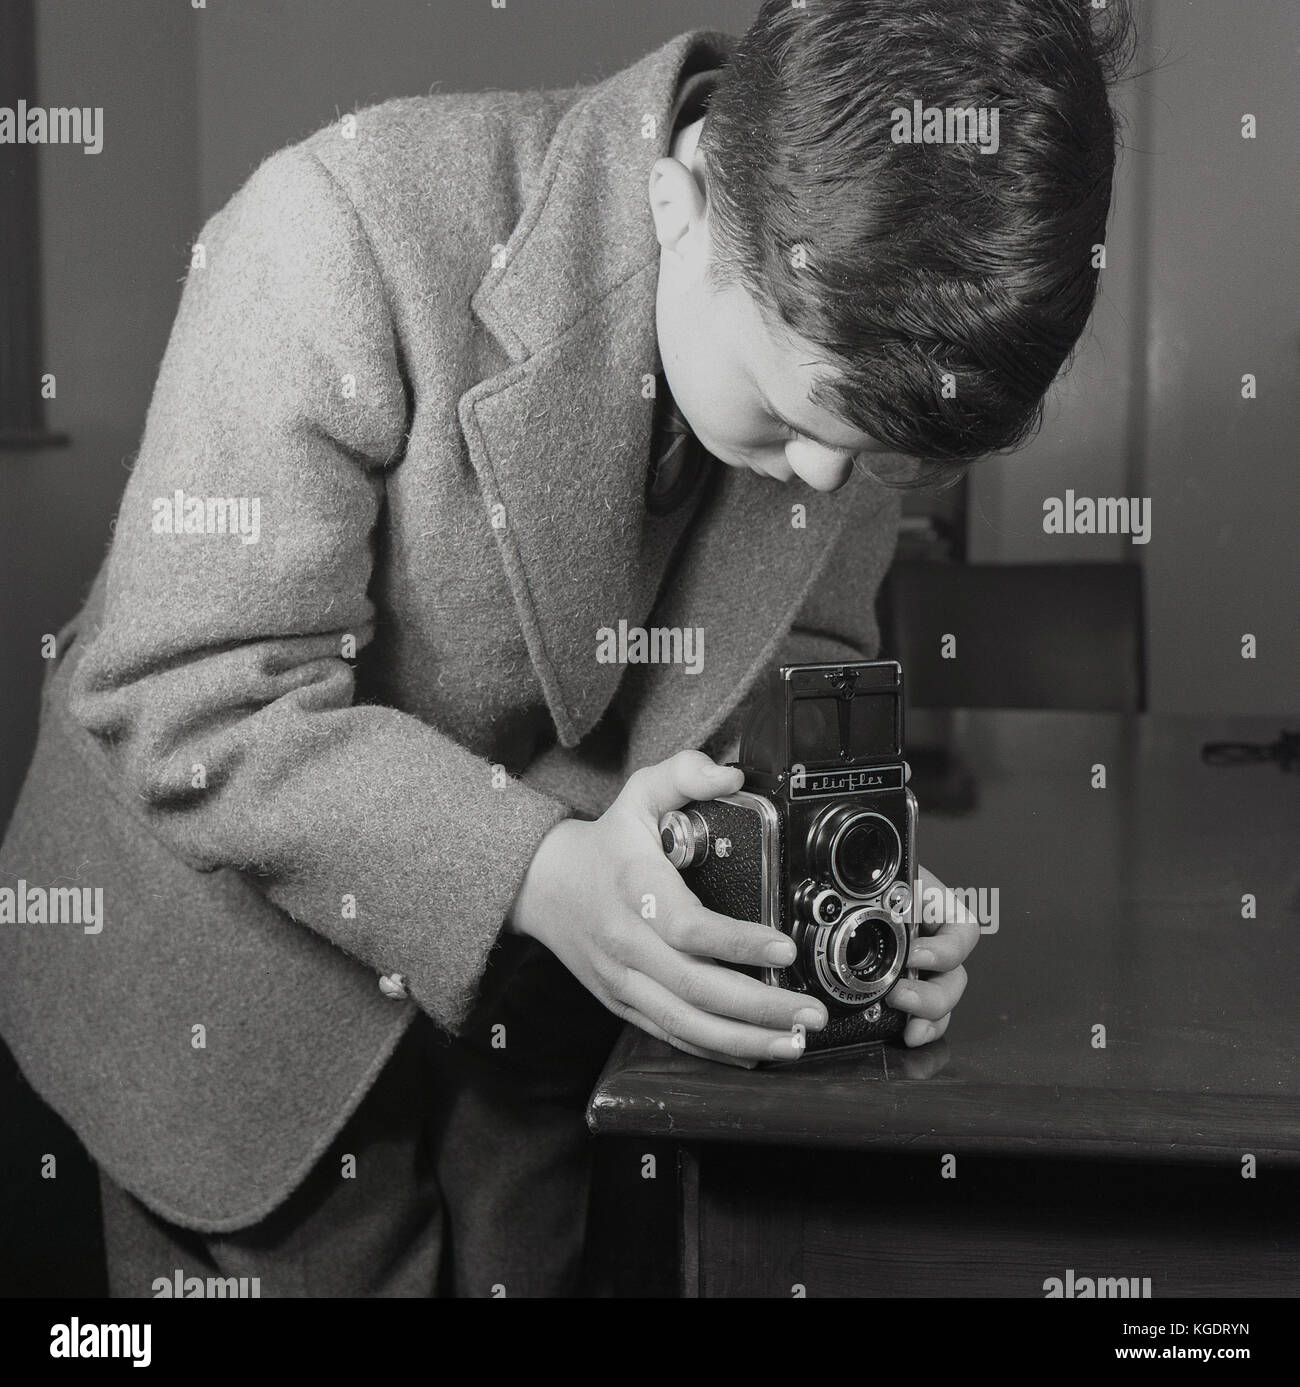 1950s, historical, England, Uk, a smartly dressed teenage boy wearing a jacket and tie uses a table corner for stability as he takes a picture using a Ferrania Elioflex camera. This was an Italian made film camera that imitated the look of a TLR ( Twins Lens Reflex) Rolleiflex, which were the professional cameras of their day, but this make was not one as the viewfinder was a not a true reflex finder. It was known therefore as a 'pseudo TLR' but was popular in this era. Stock Photo